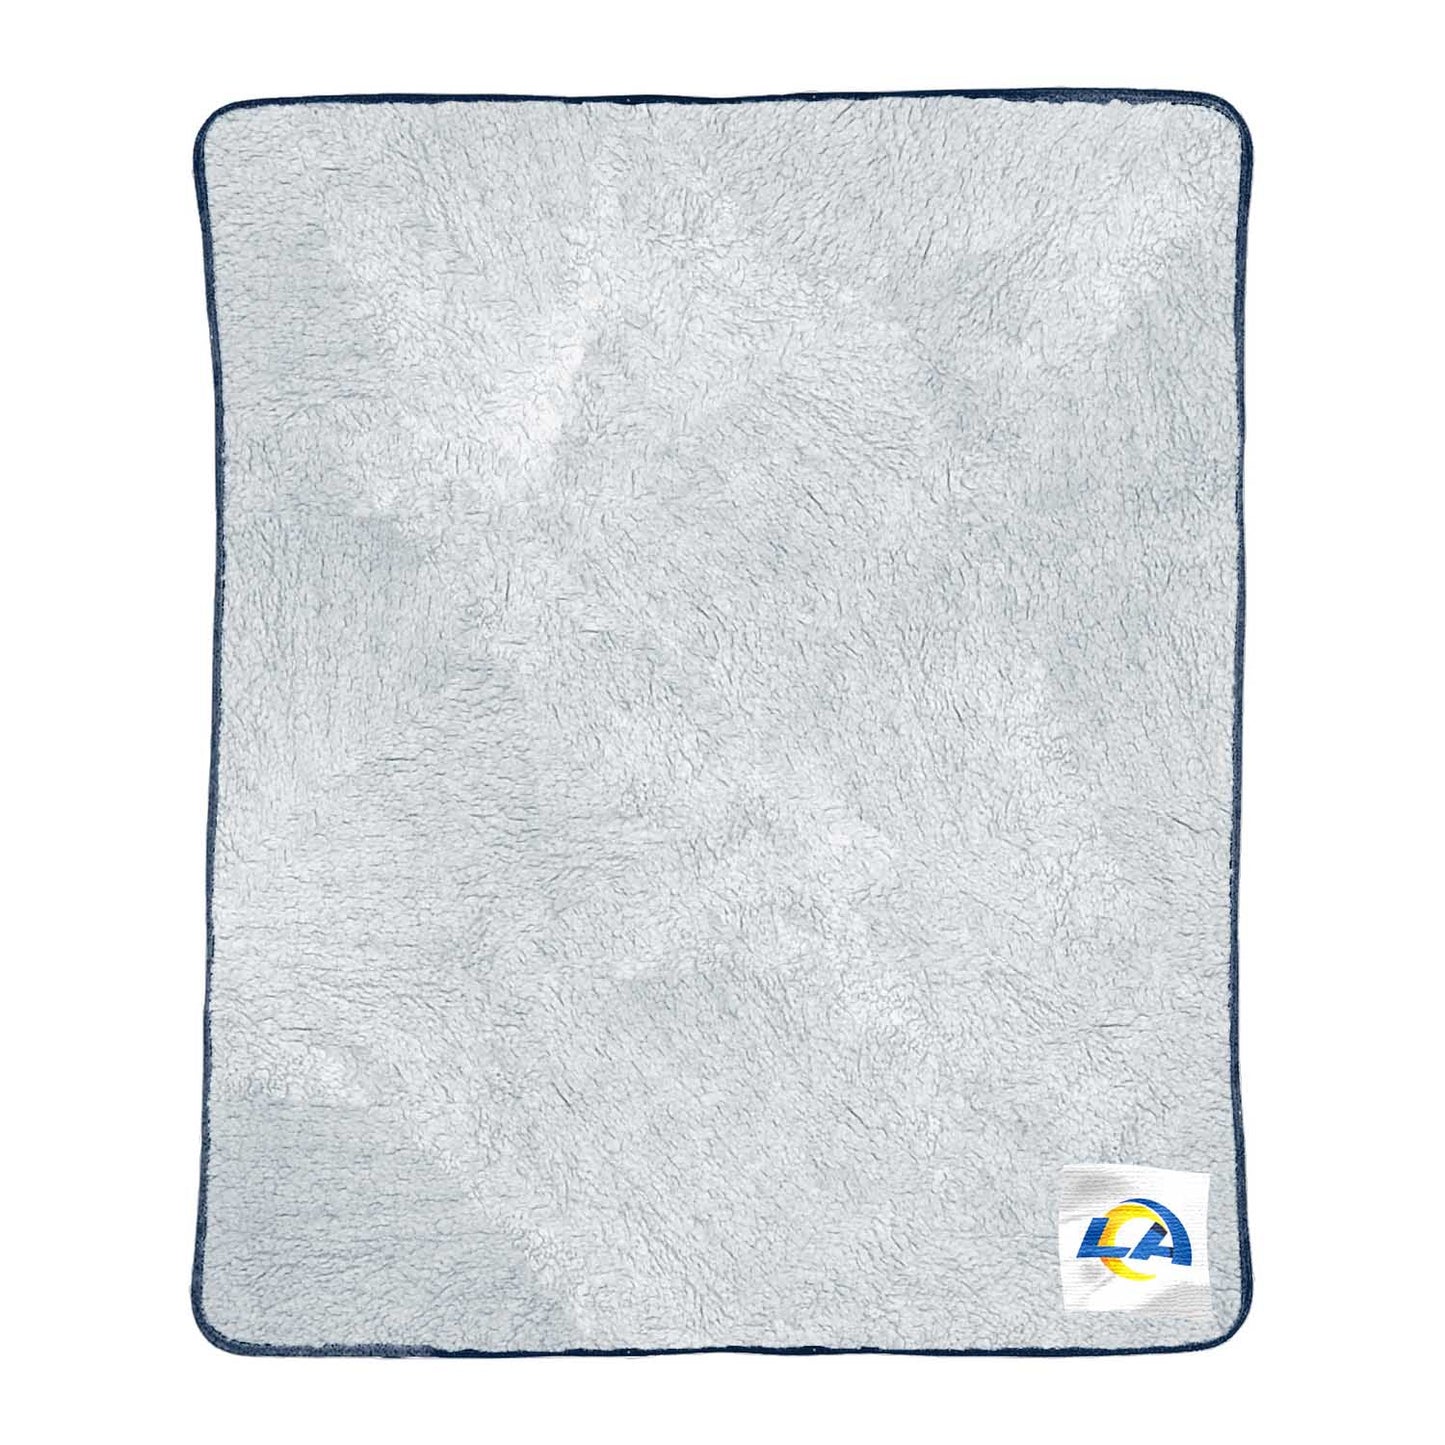 Los Angeles Rams NFL Silk Touch Sherpa Throw Blanket - Blue